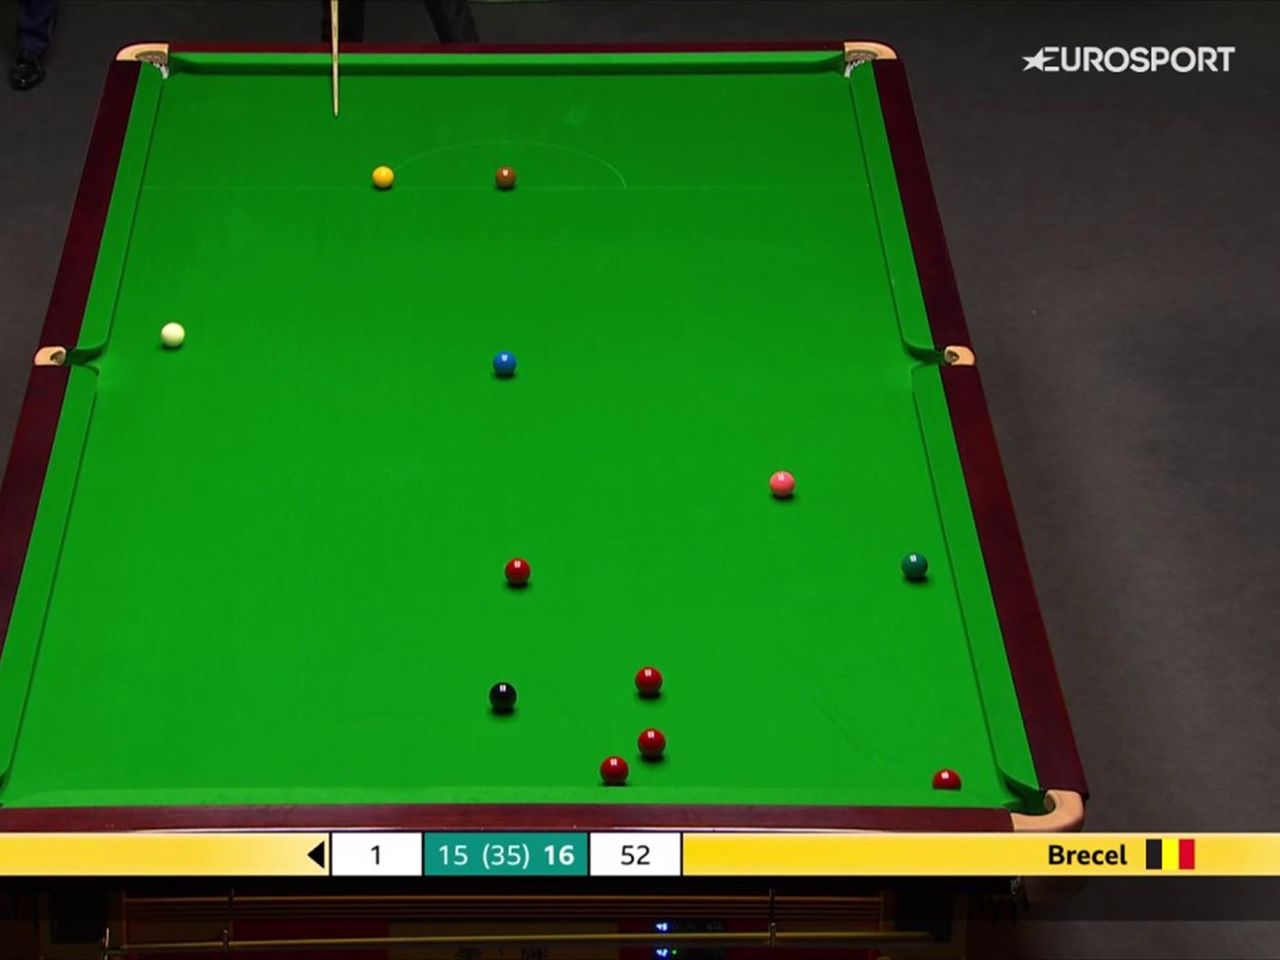 World Snooker Championship final Hes only human - Huge drama as Mark Selby flukes red but misses brown - Snooker video